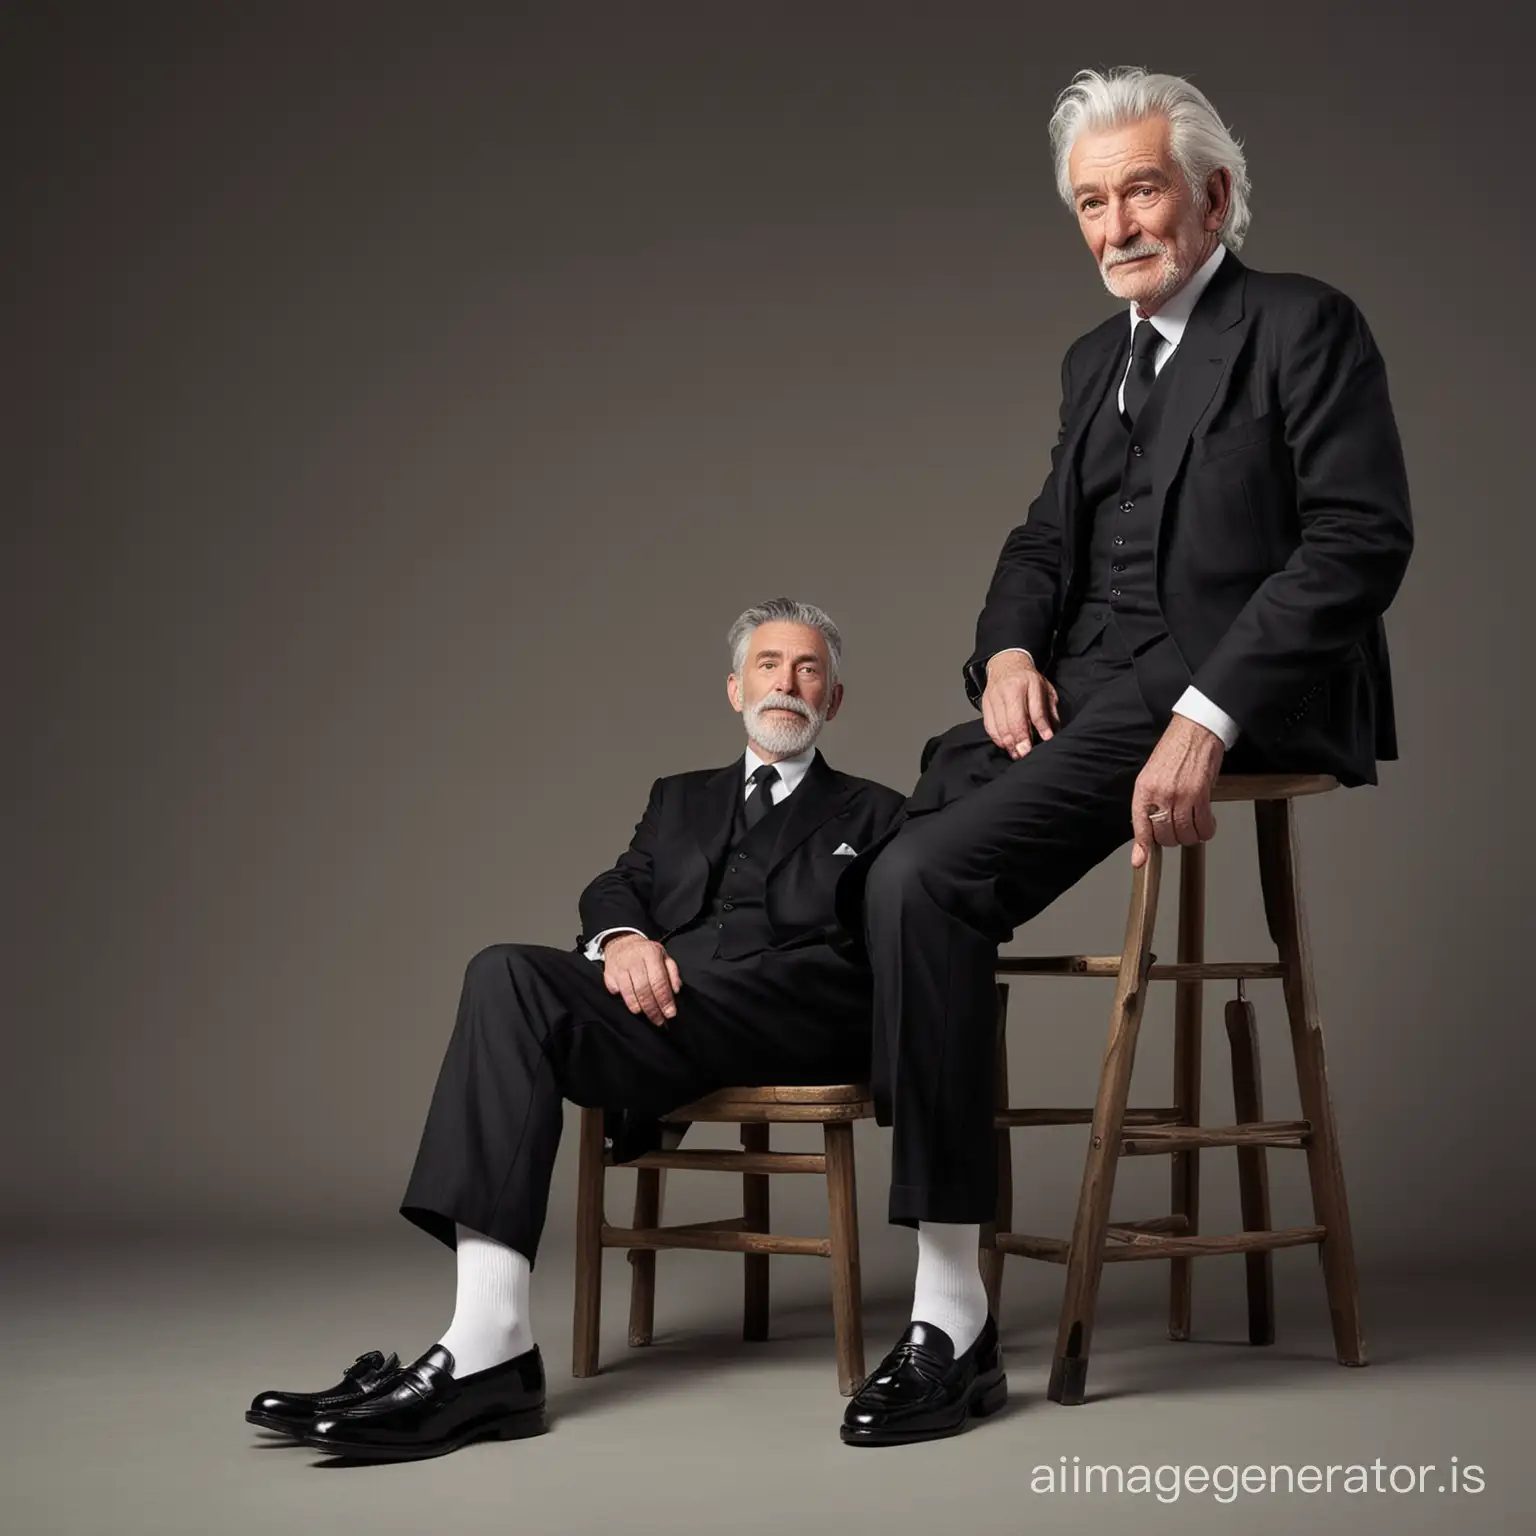 English old man 70 years old, shot height, wearing black suit, white shirt, white socks, black loafers, grey hair, sit on a chair, full body shot, full body shot, fantasy light cream solid background, dramatic lighting